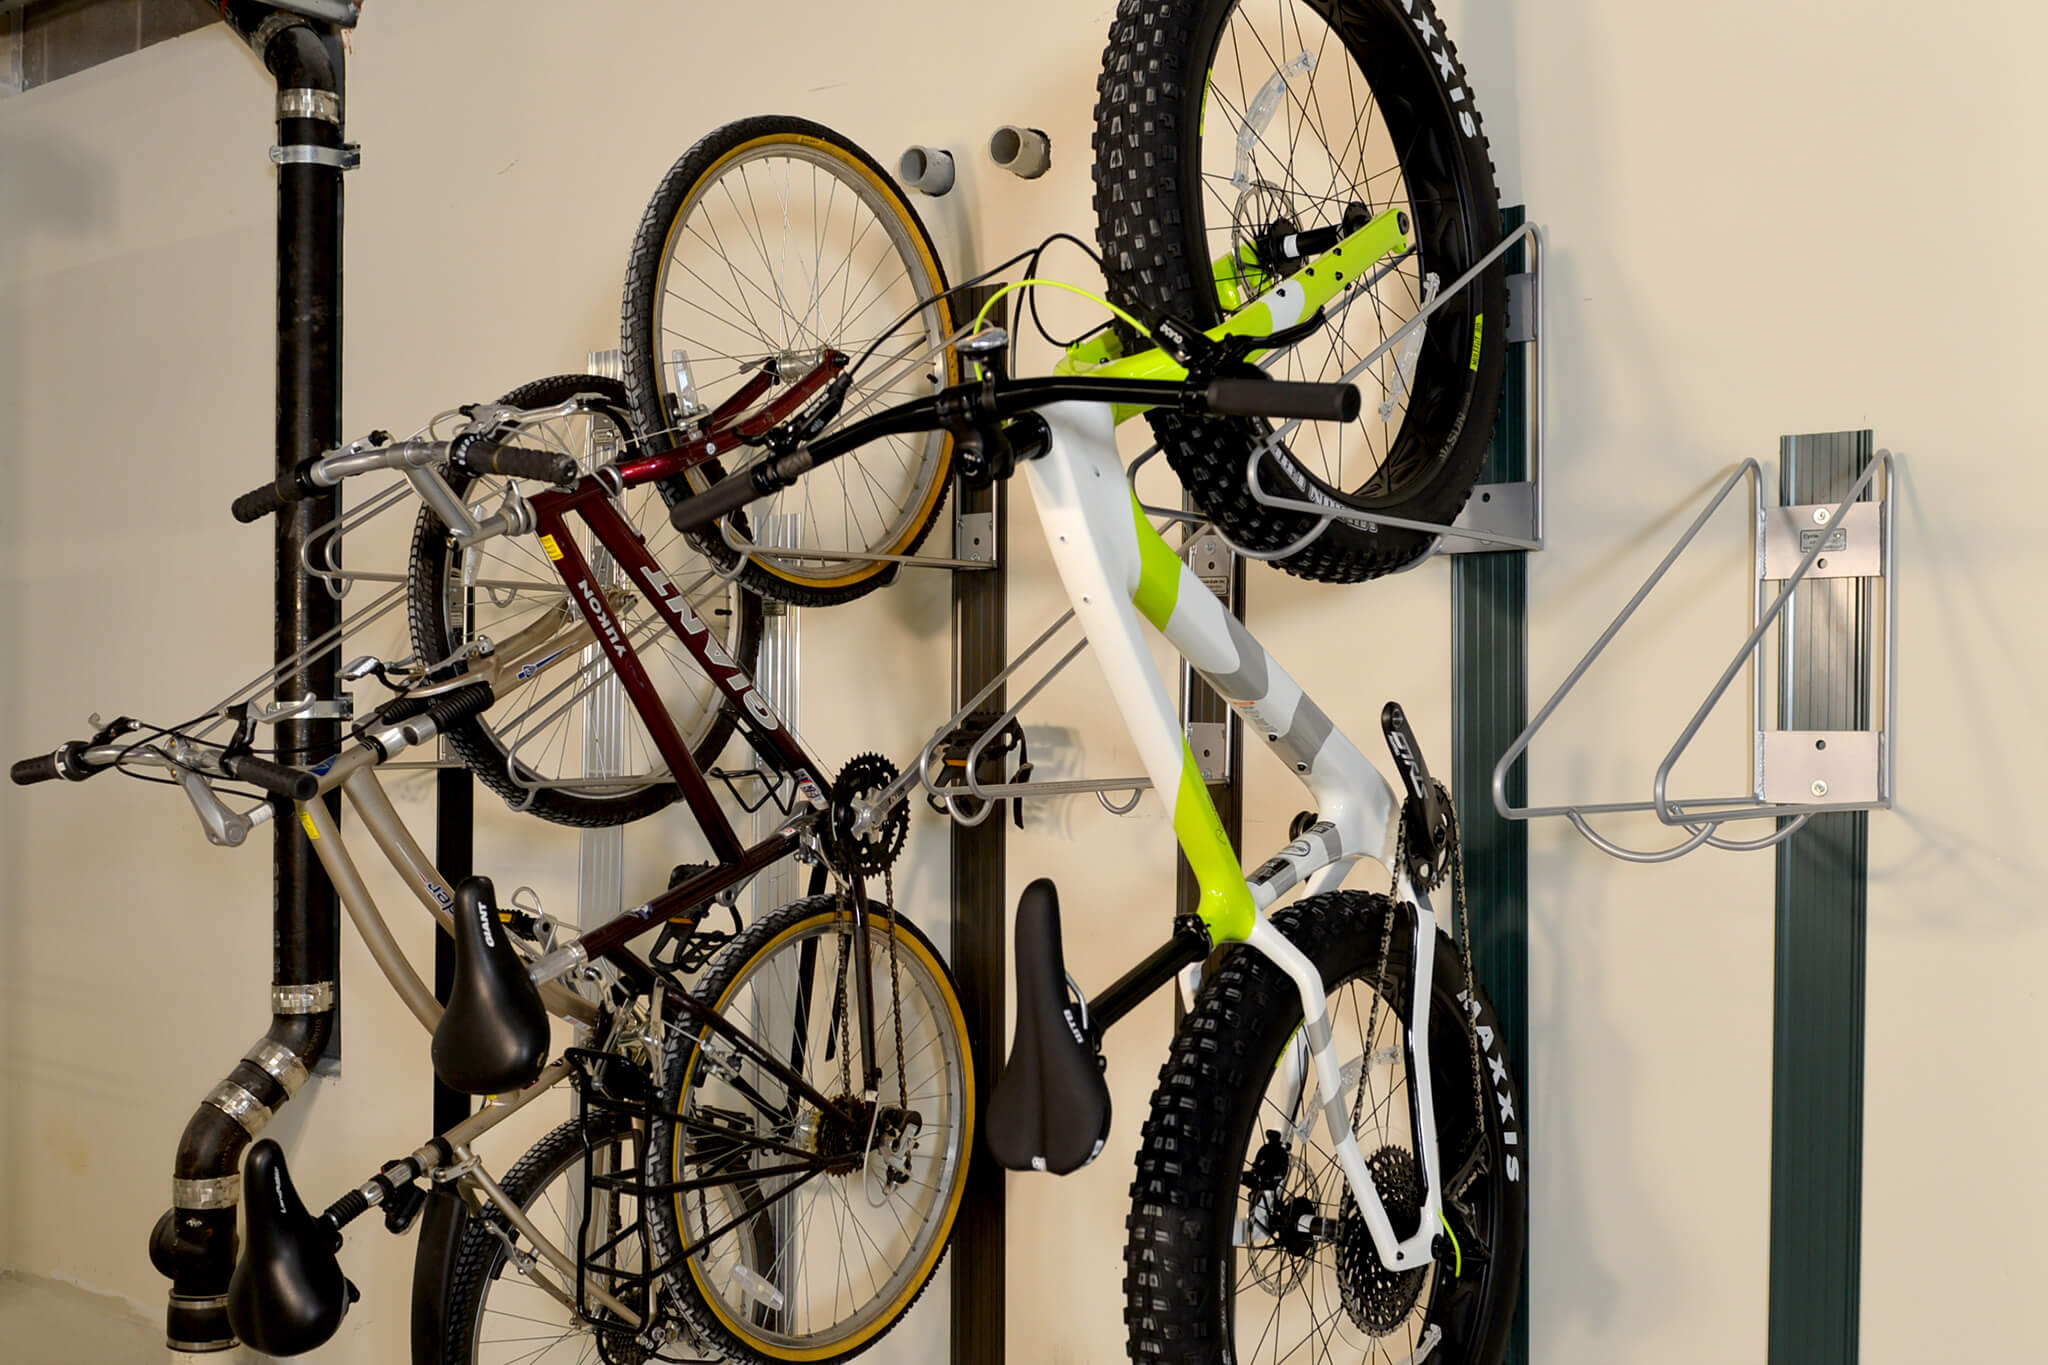 Bicycle Wall Mount With Wall/tyre Protectors Bicycle Storage Rack